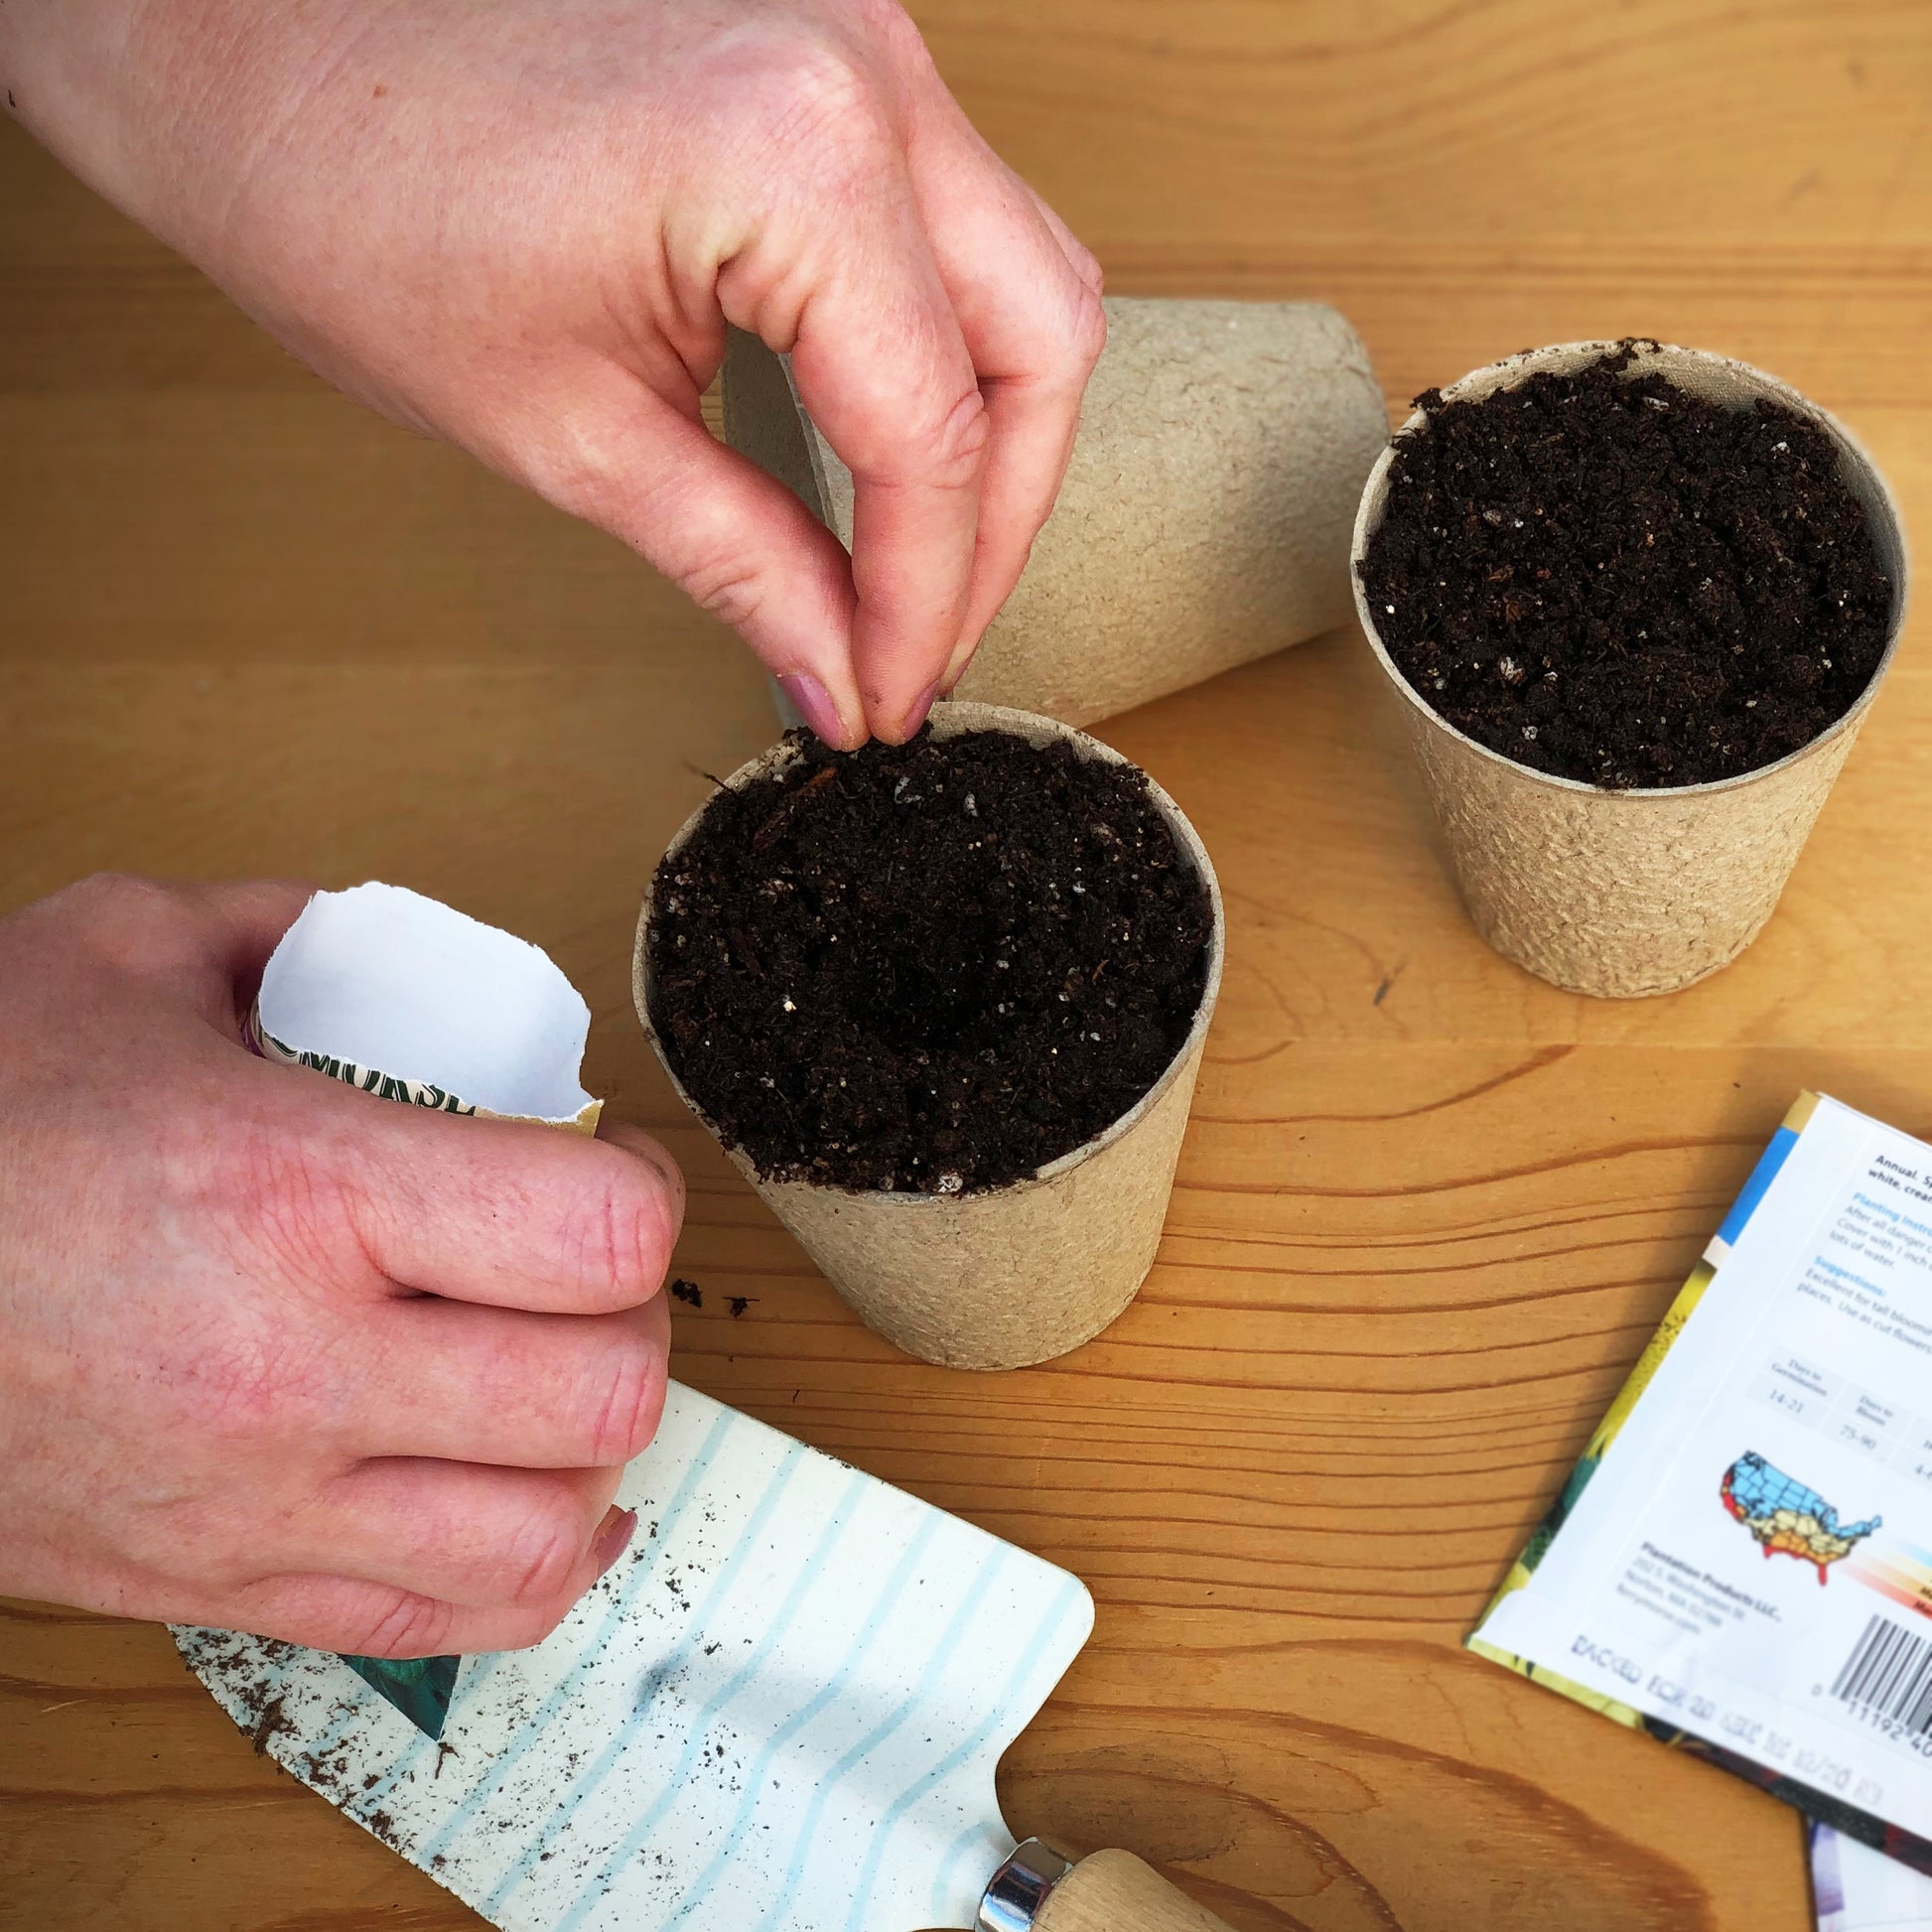 Start Ultra Cool Hybrid Watermelon seeds in biodegradable paper or peat pots.